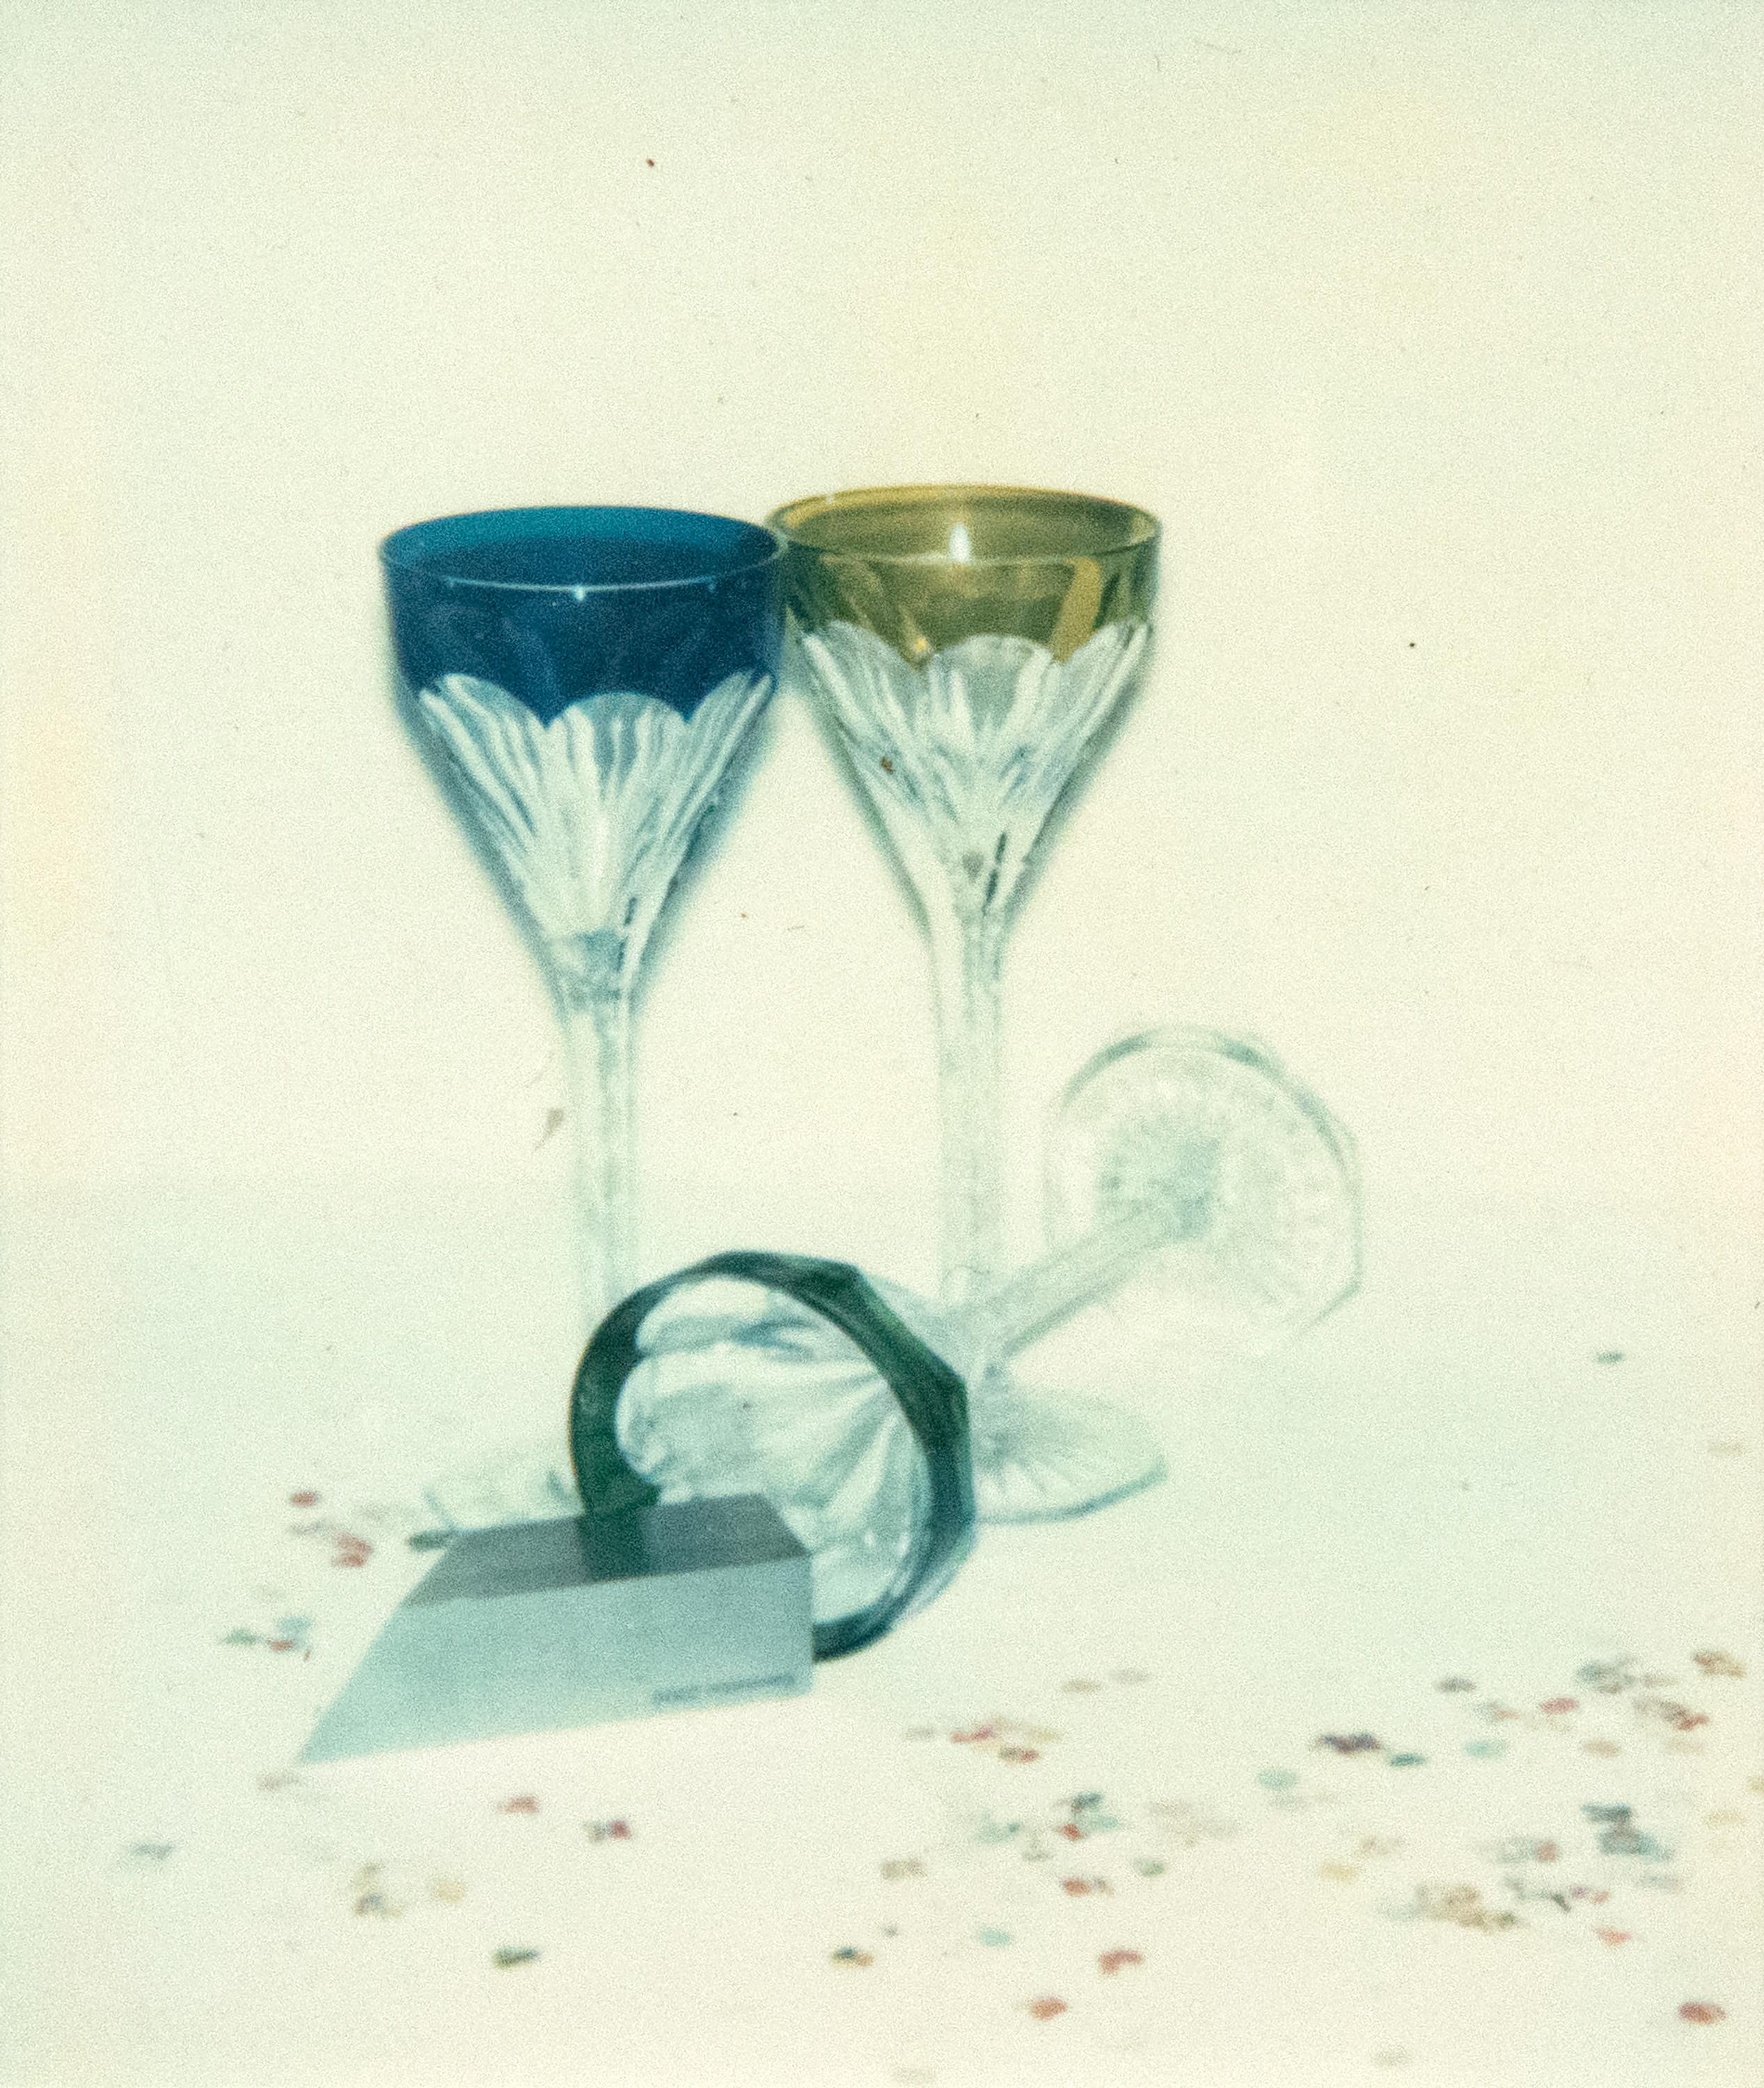 Committee 2000 Champagne Glasses - Photograph by Andy Warhol